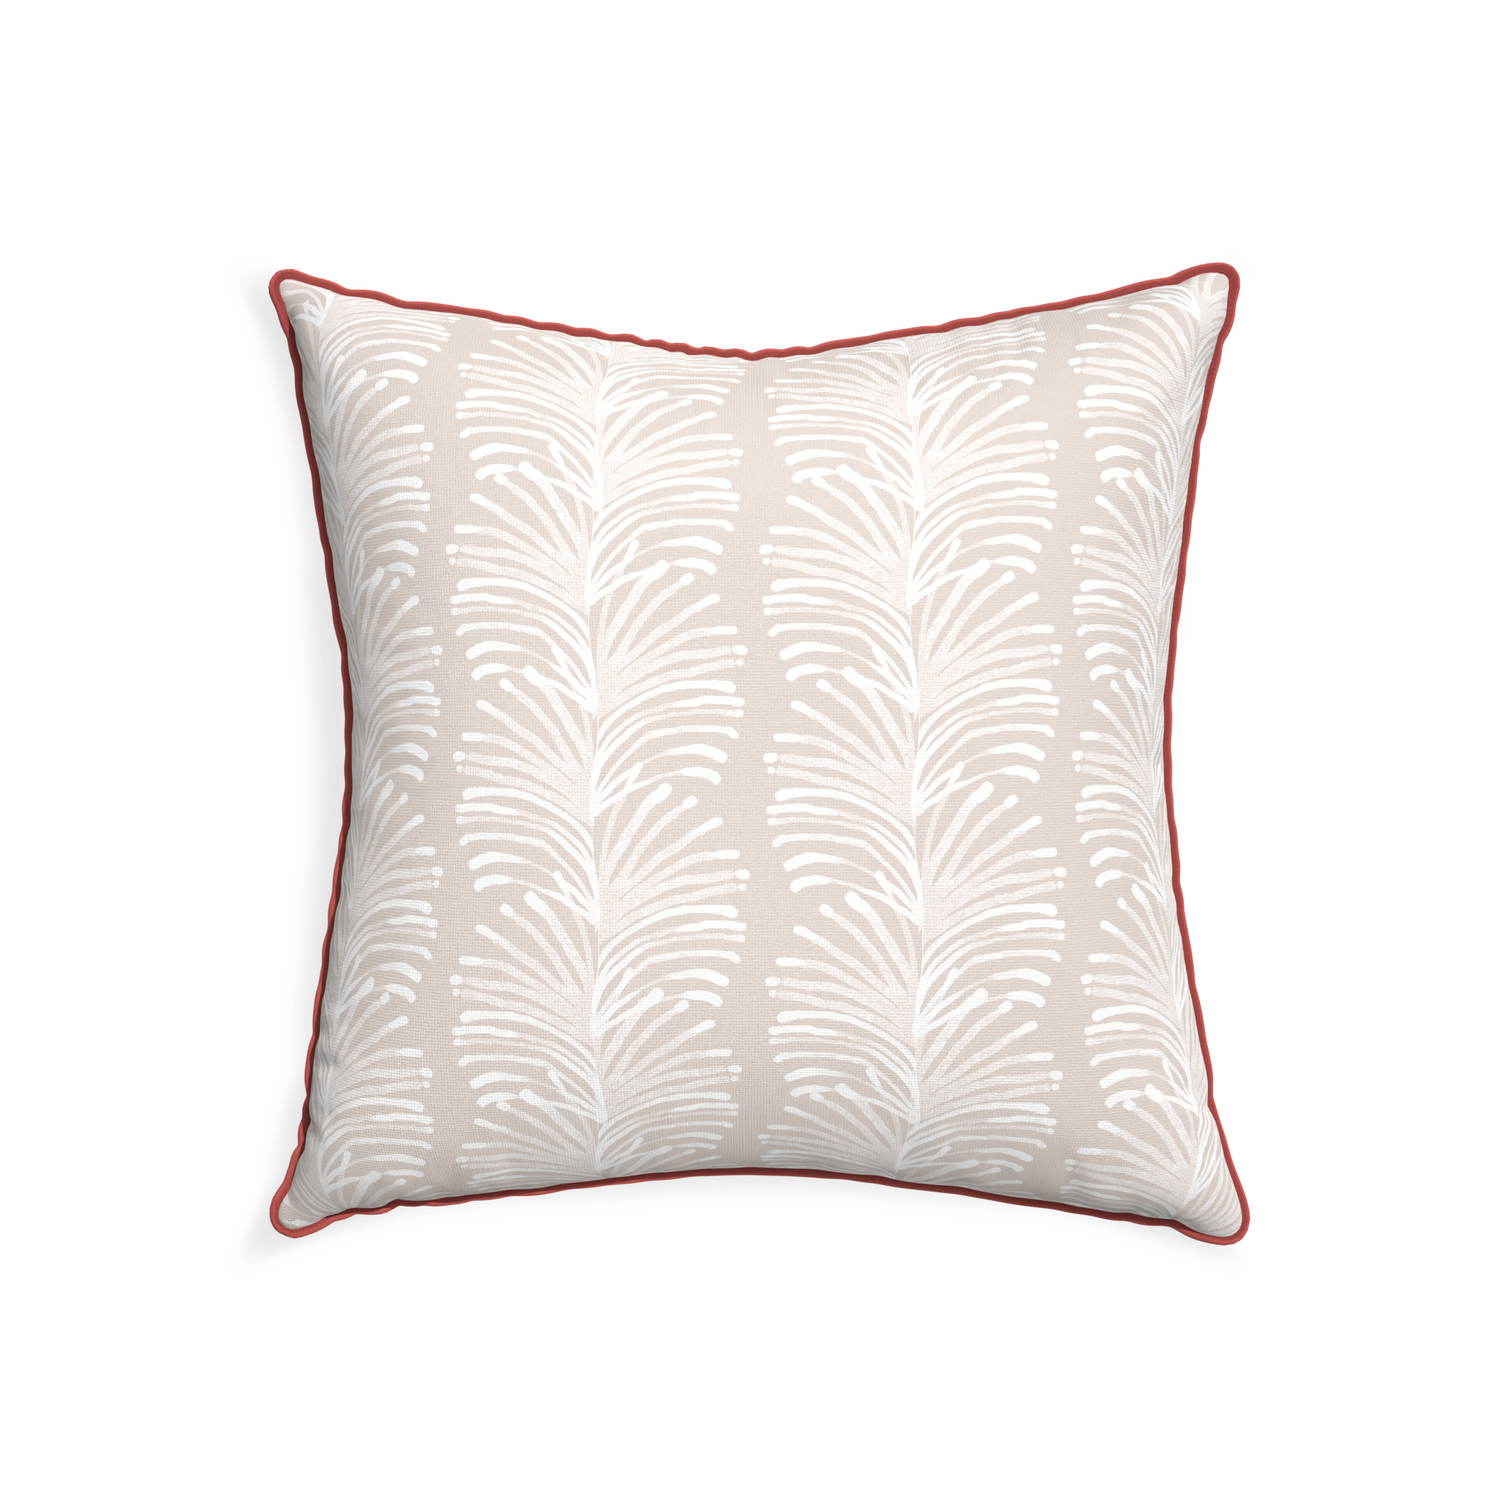 22-square emma sand custom pillow with c piping on white background